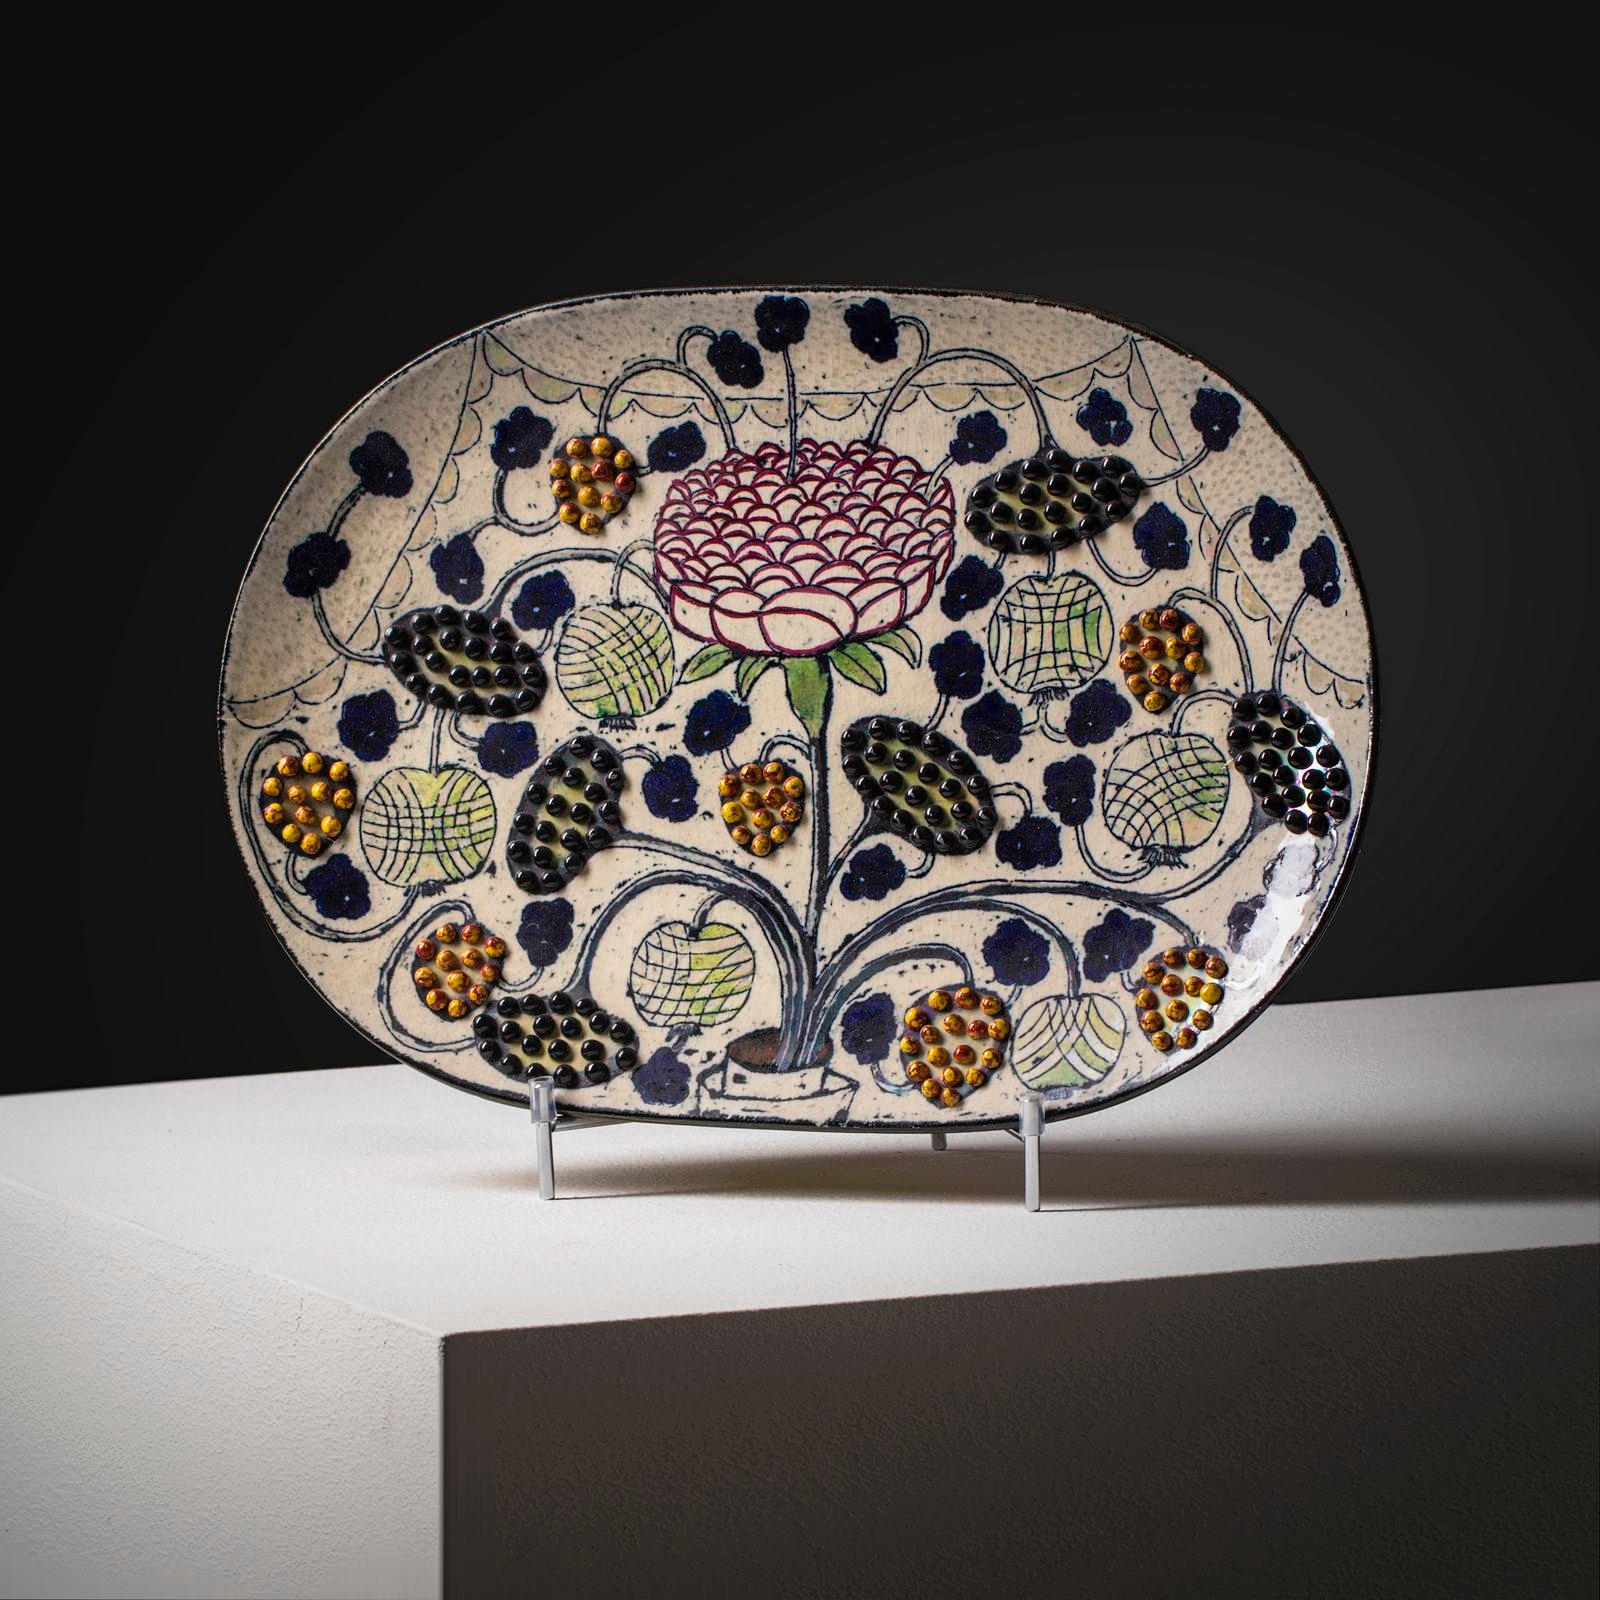 A decorative ceramic plate representing a floral pattern by Birger Kaipiainen